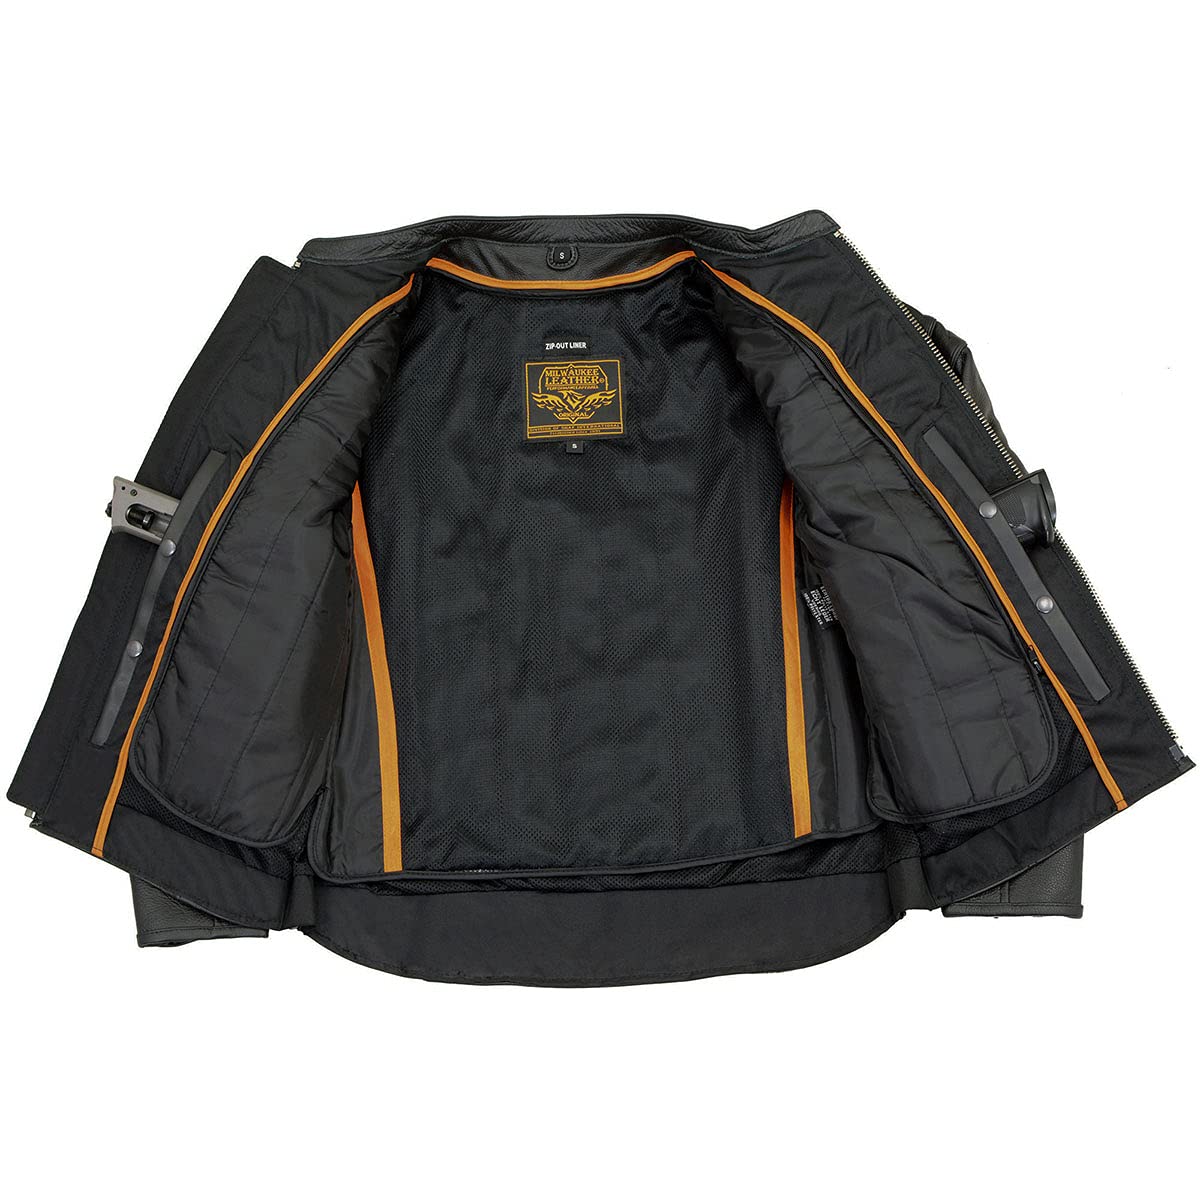 Leather King Men's Sporty Scooter Crossover Leather Jacket